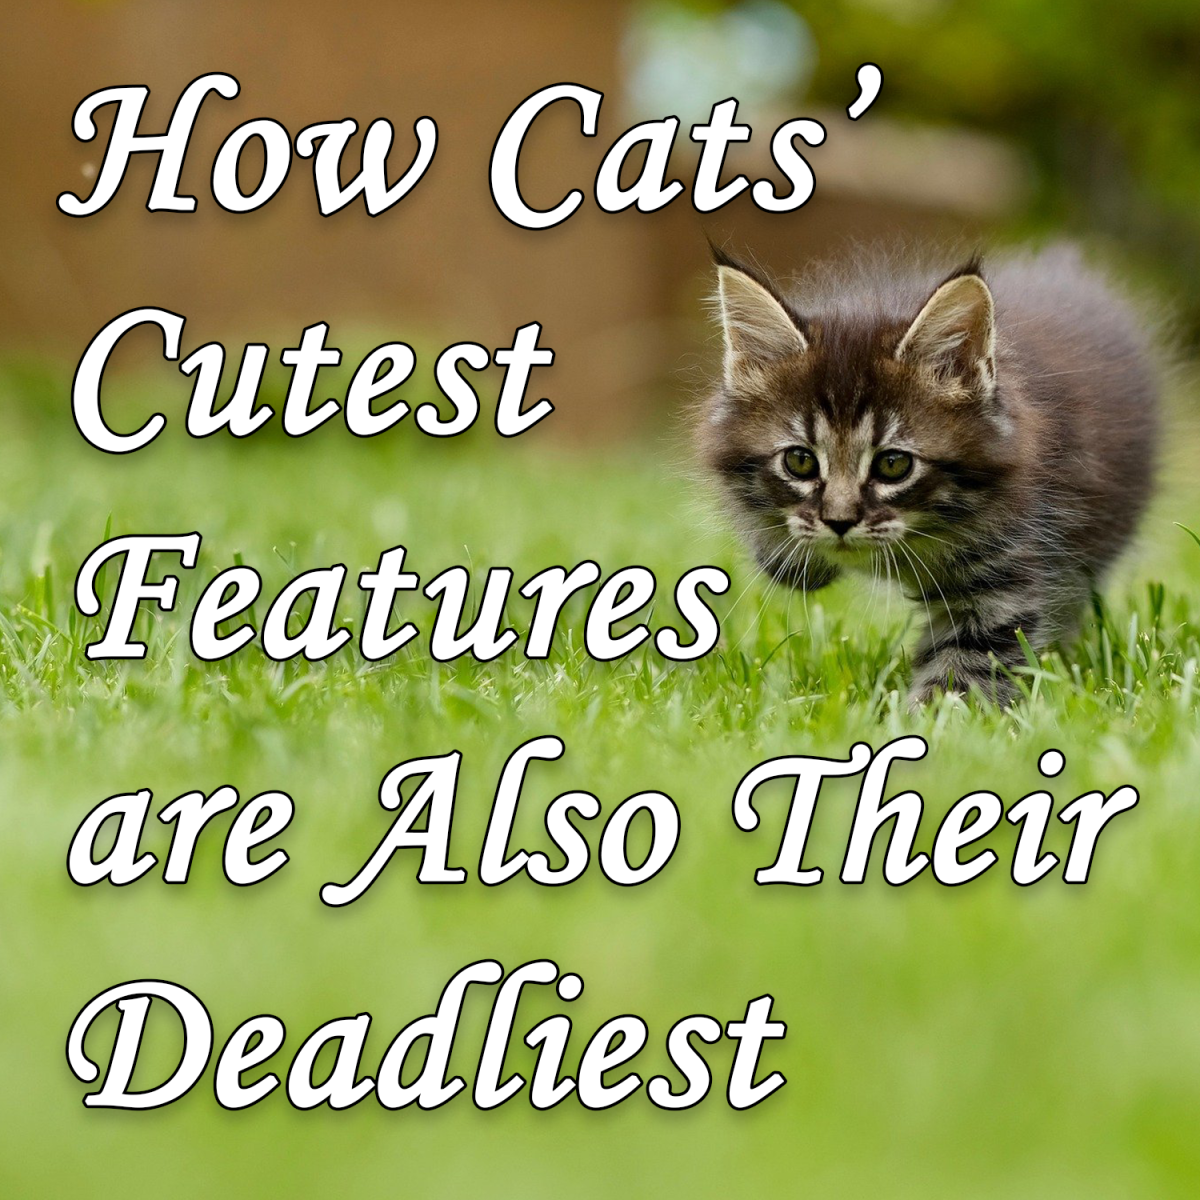 How Cats’ Cutest Features are Also Their Deadliest